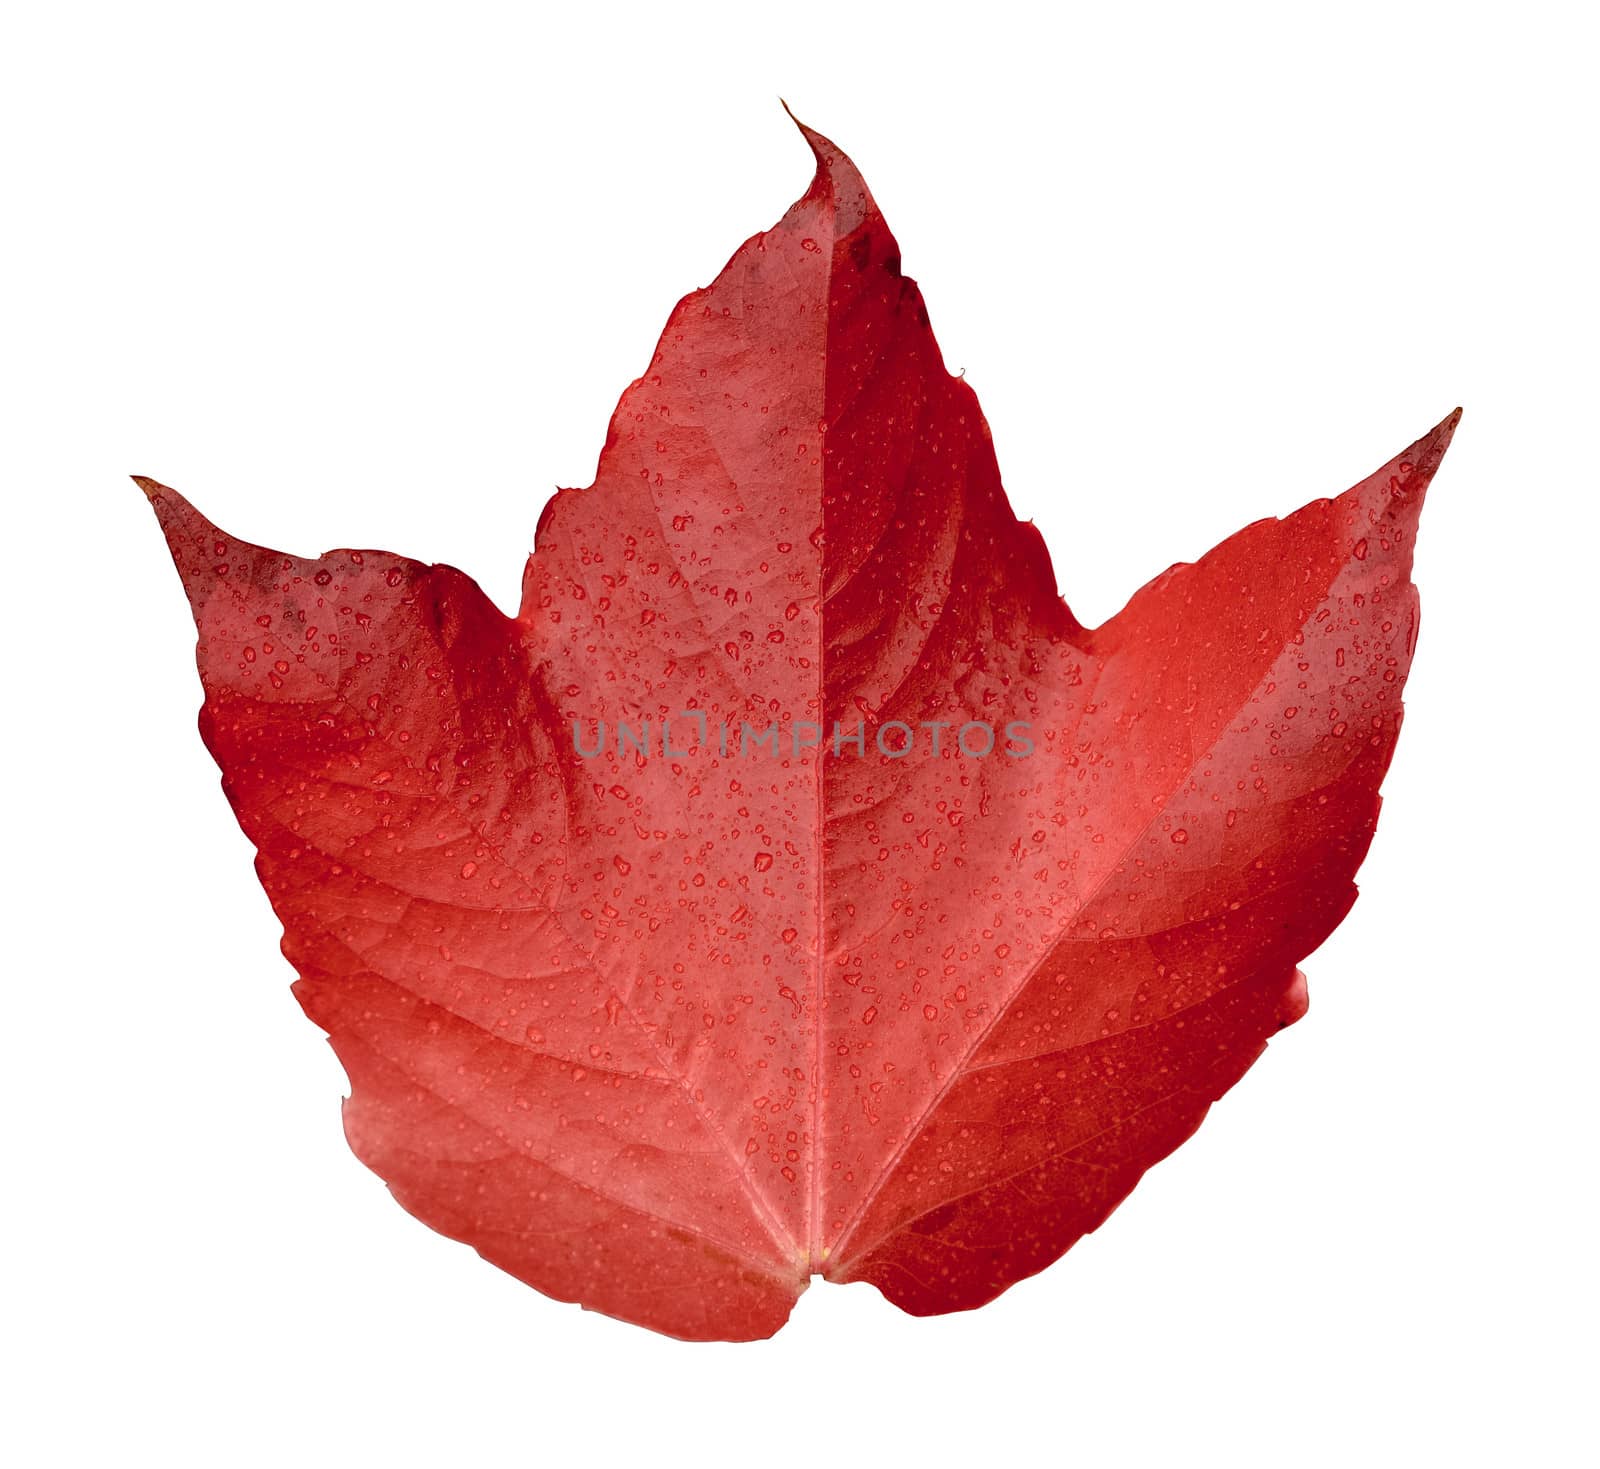 Isolation of A Wet Red Autumn Leaf With Clipping Path